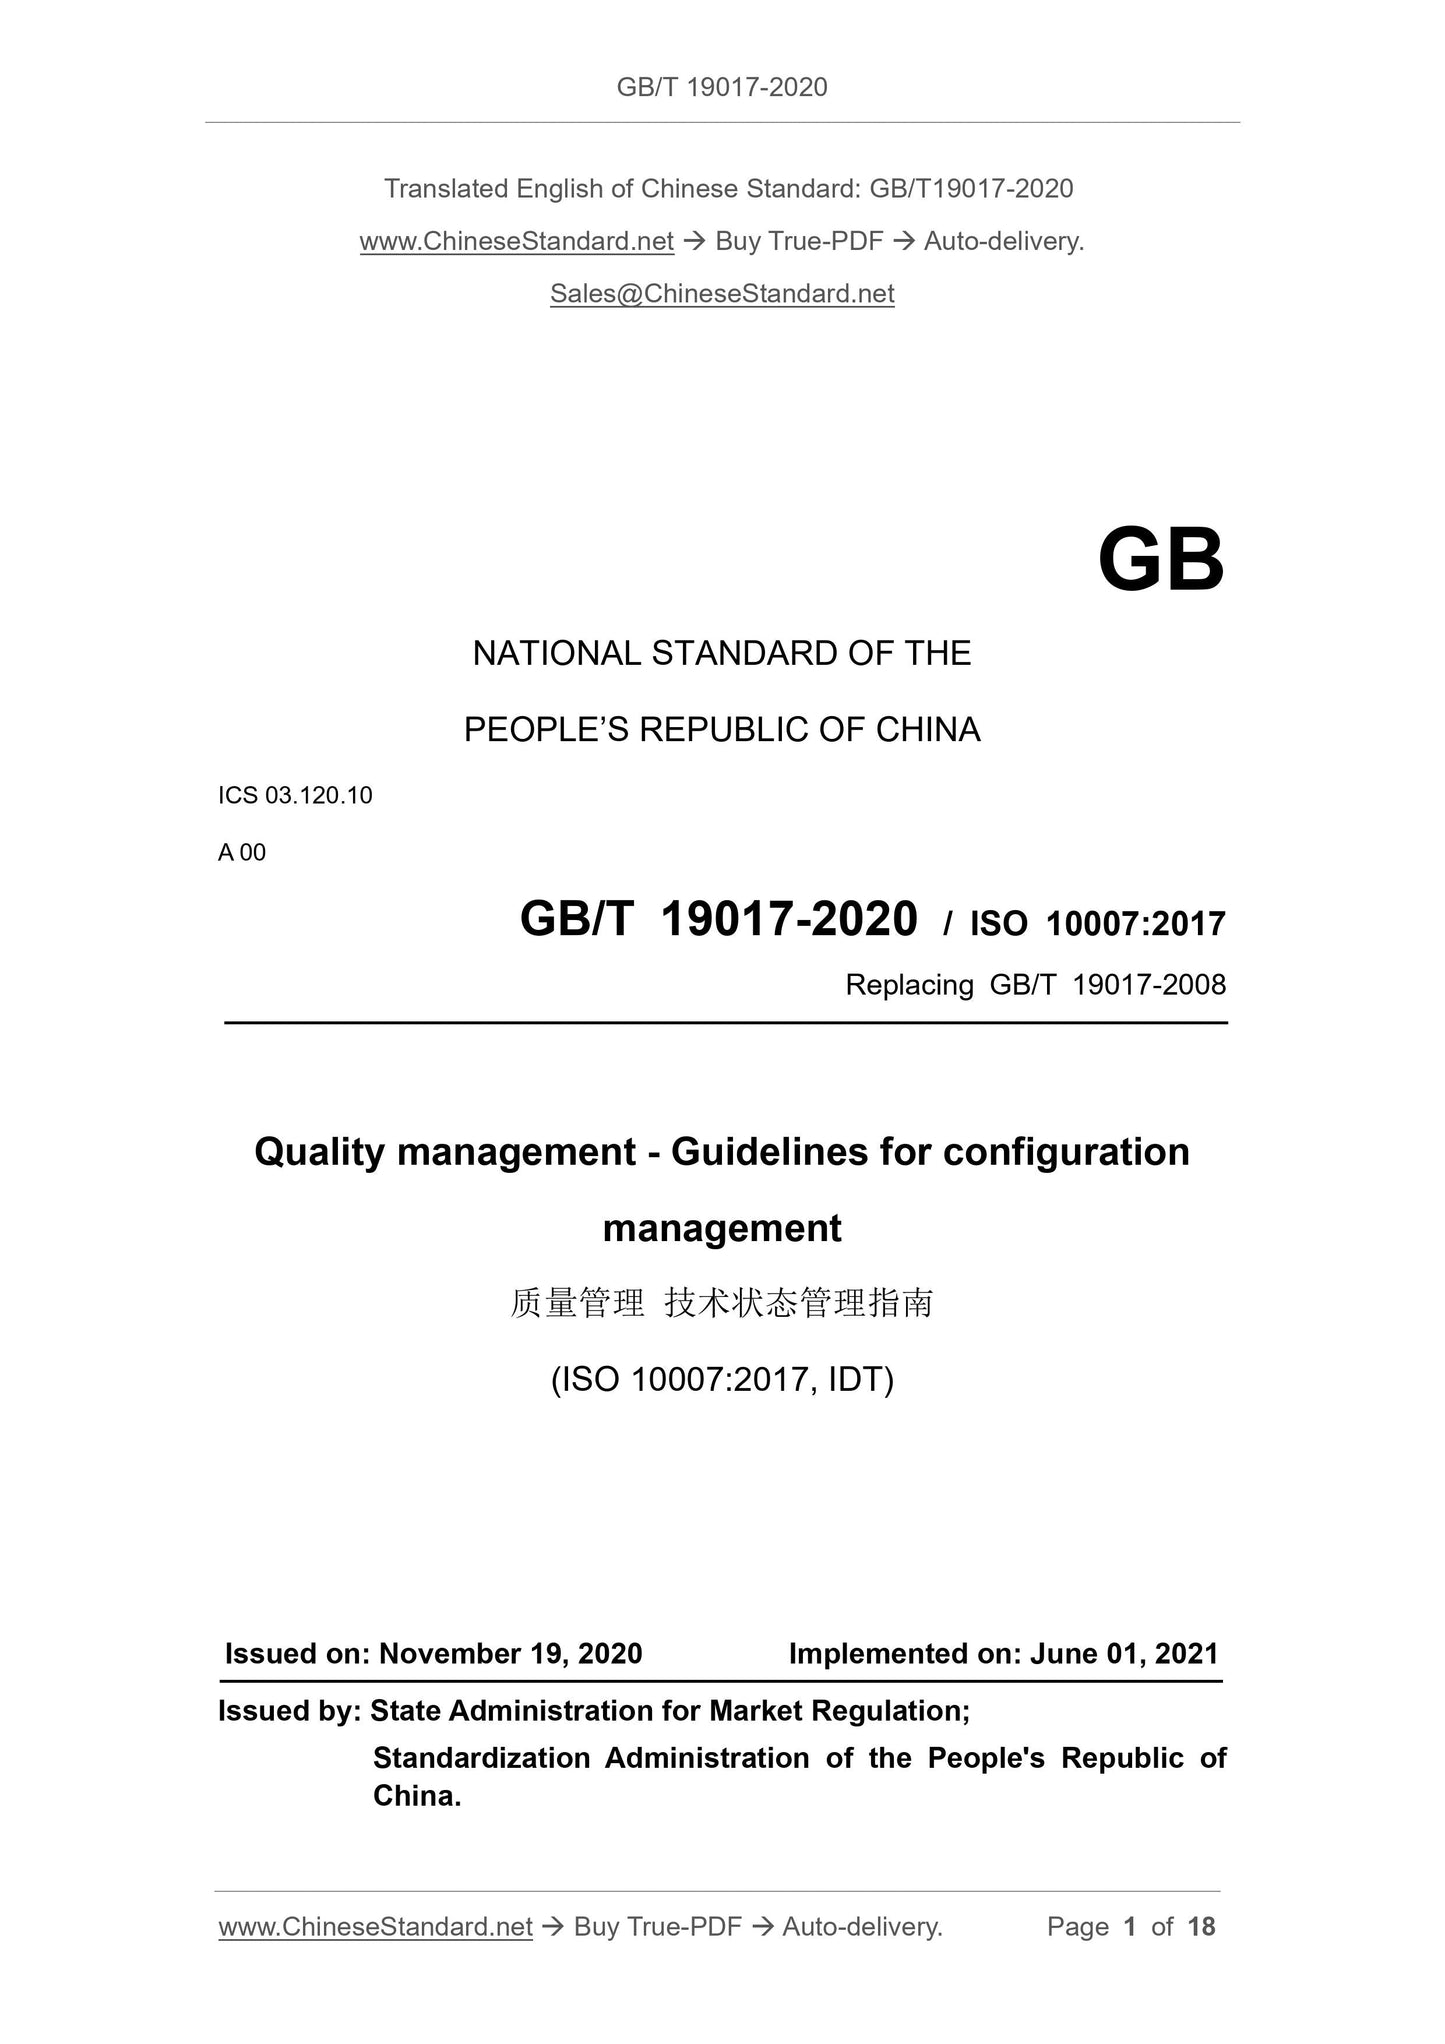 GB/T 19017-2020 Page 1